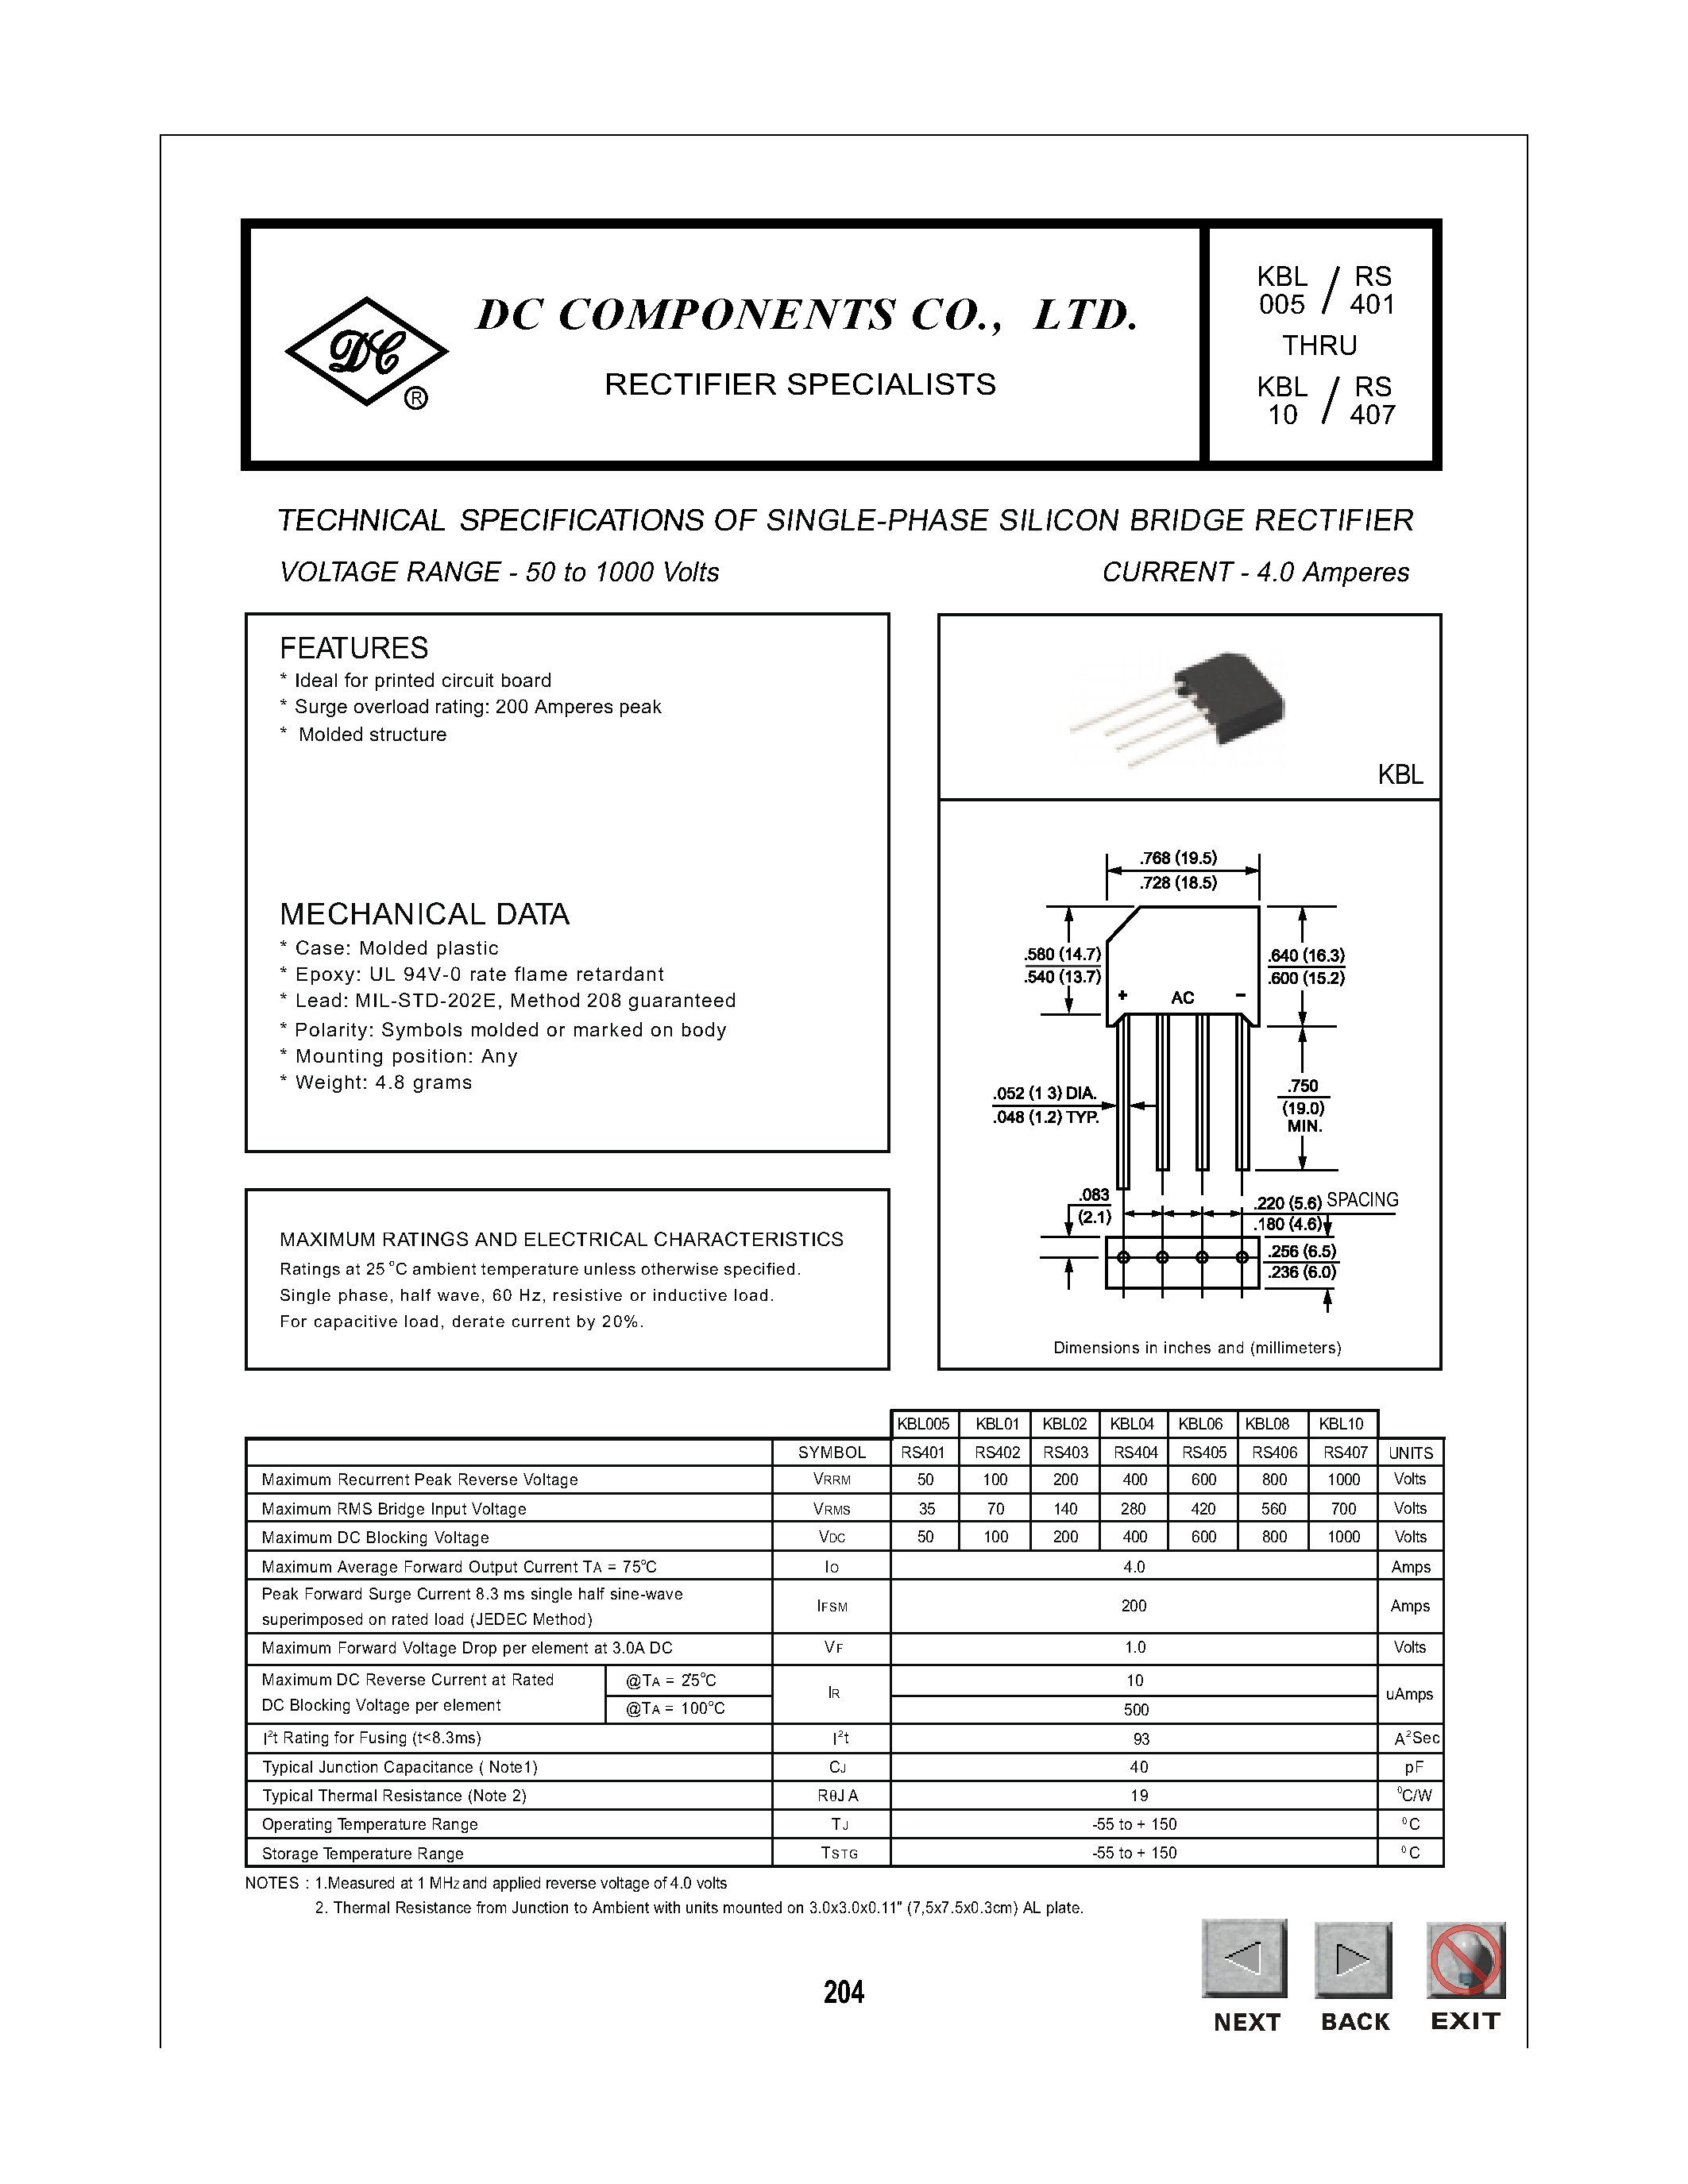 Даташит KBL005 - TECHNICAL SPECIFICATIONS OF SINGLE-PHASE SILICON BRIDGE RECTIFIER страница 1